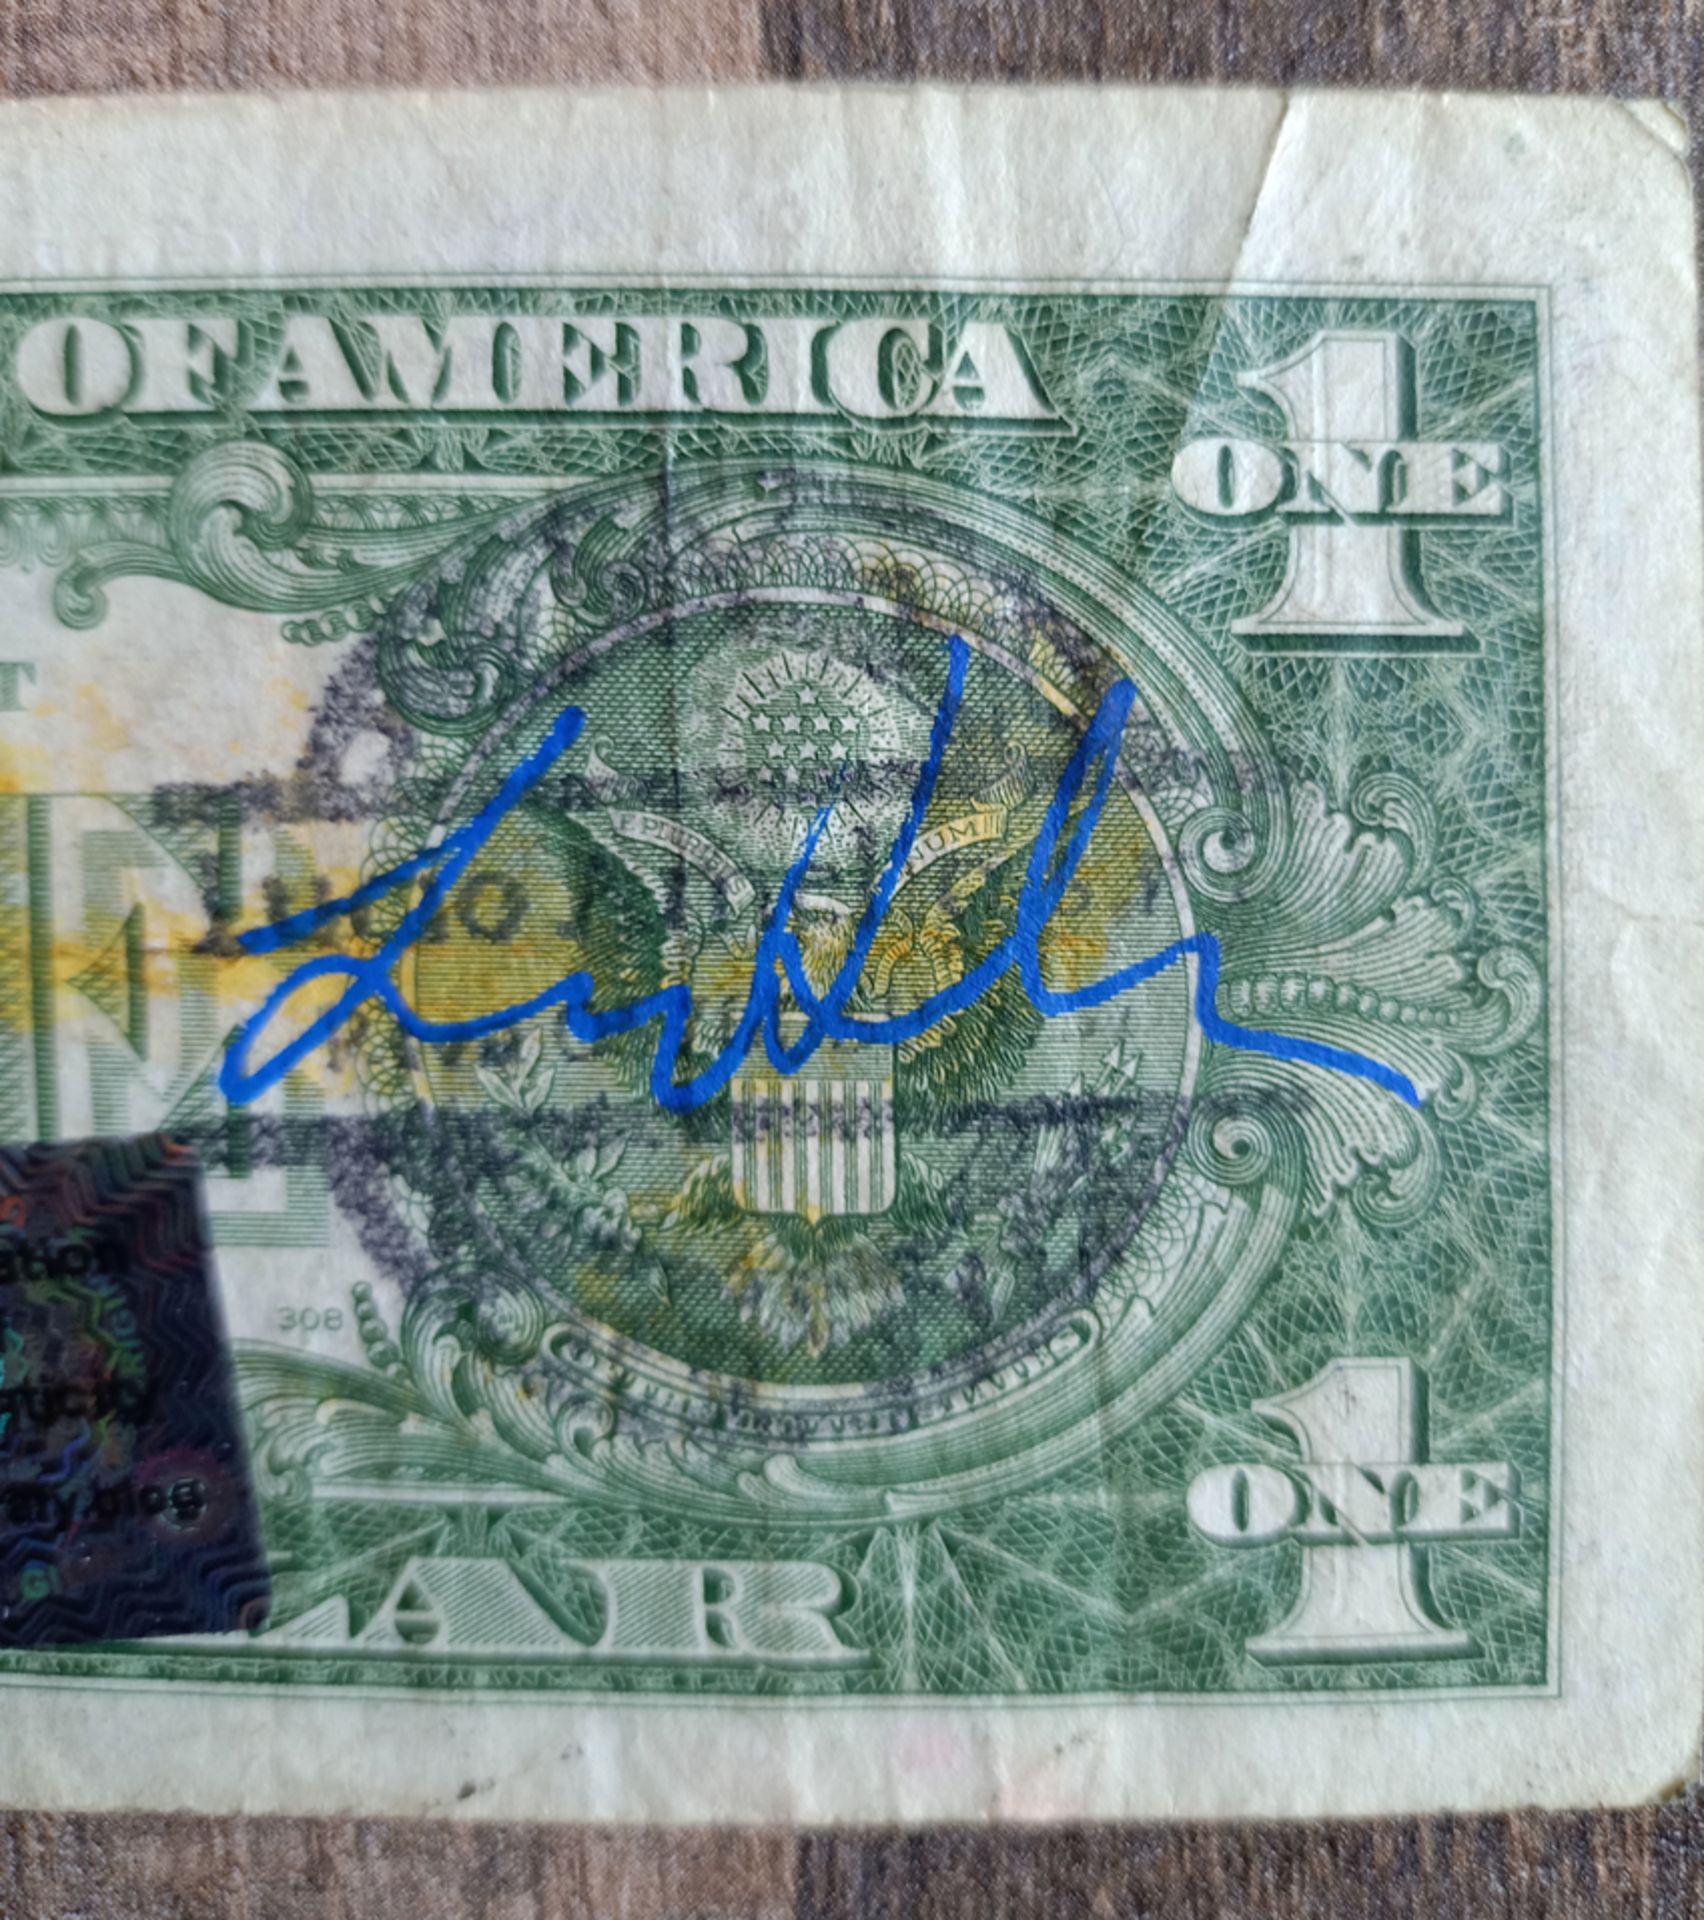 Keith Haring - Andy Warhol Dollar and Lucio Amelio Signed w/COA (#0618) - Image 4 of 10